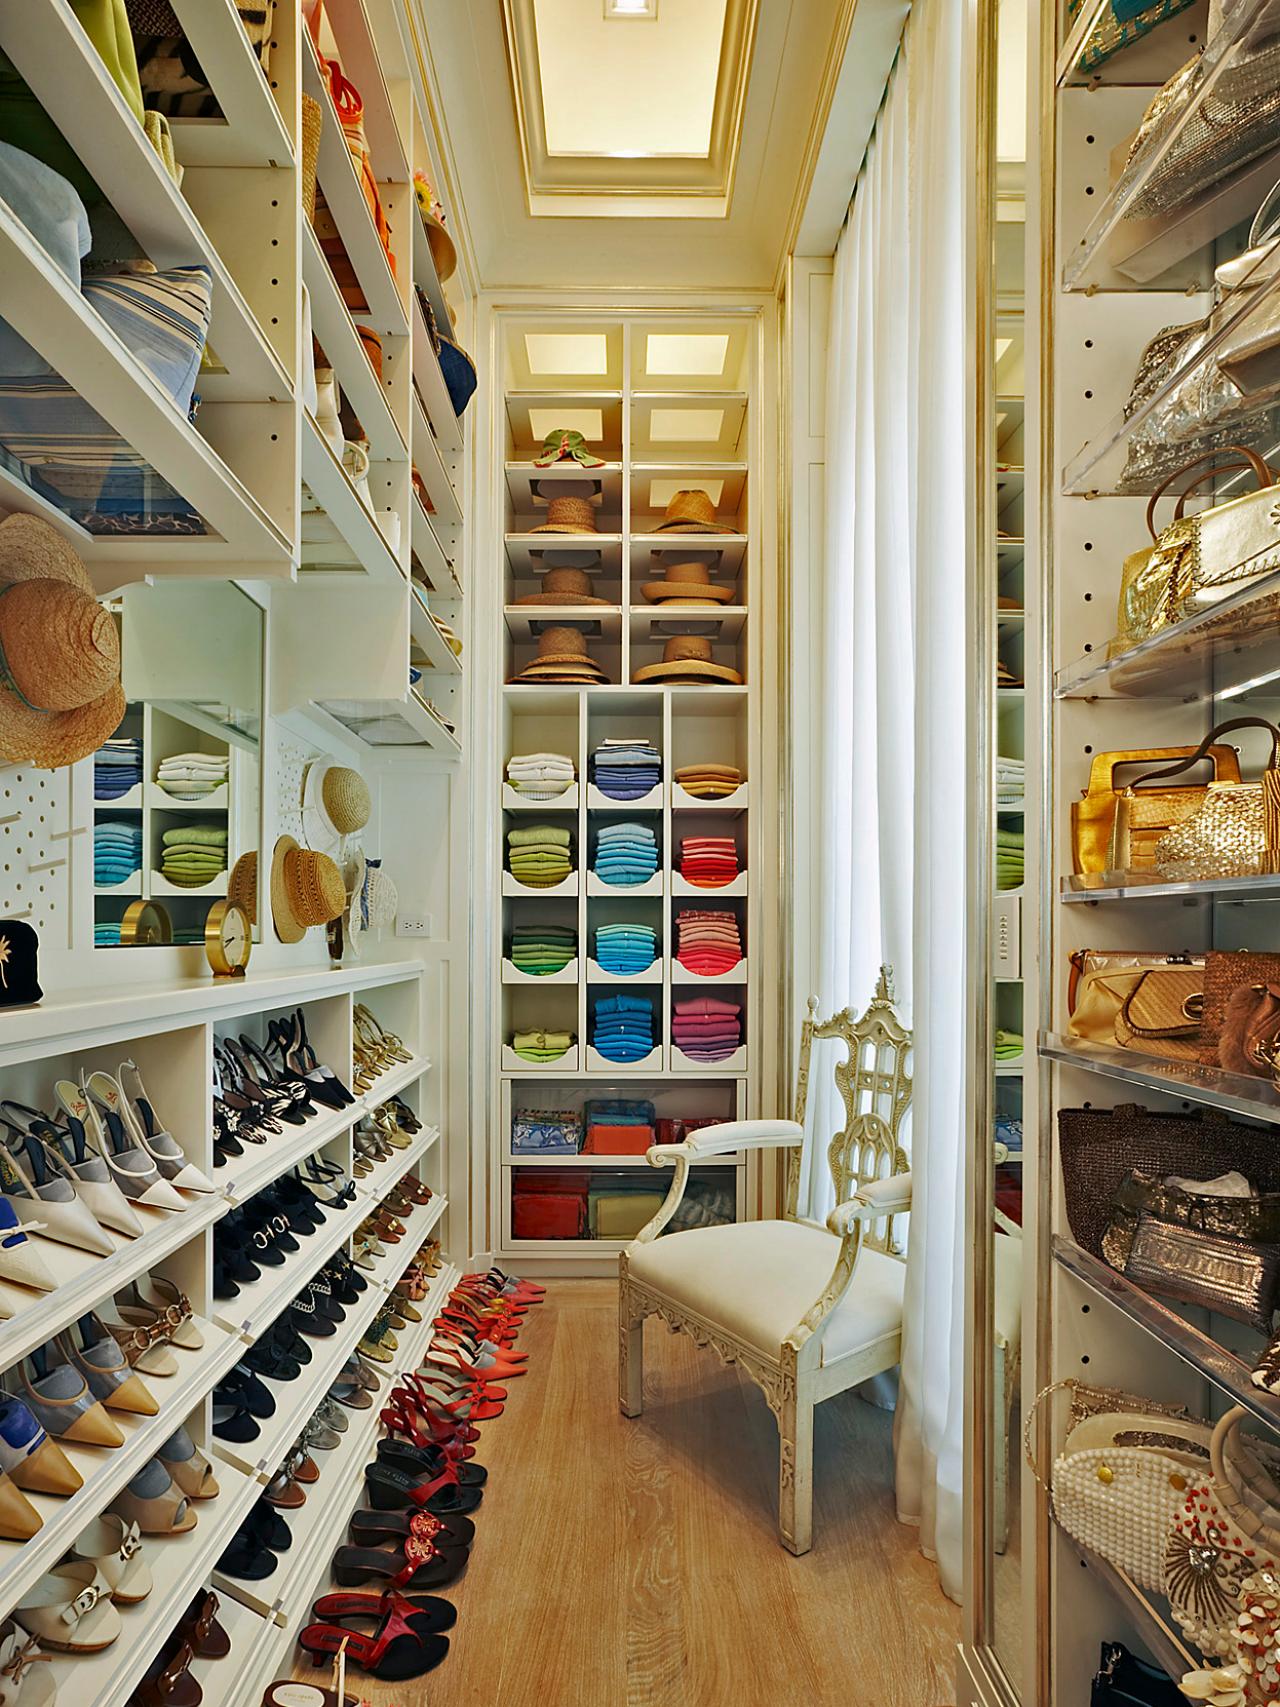 how to organize shoes in trap closet storage